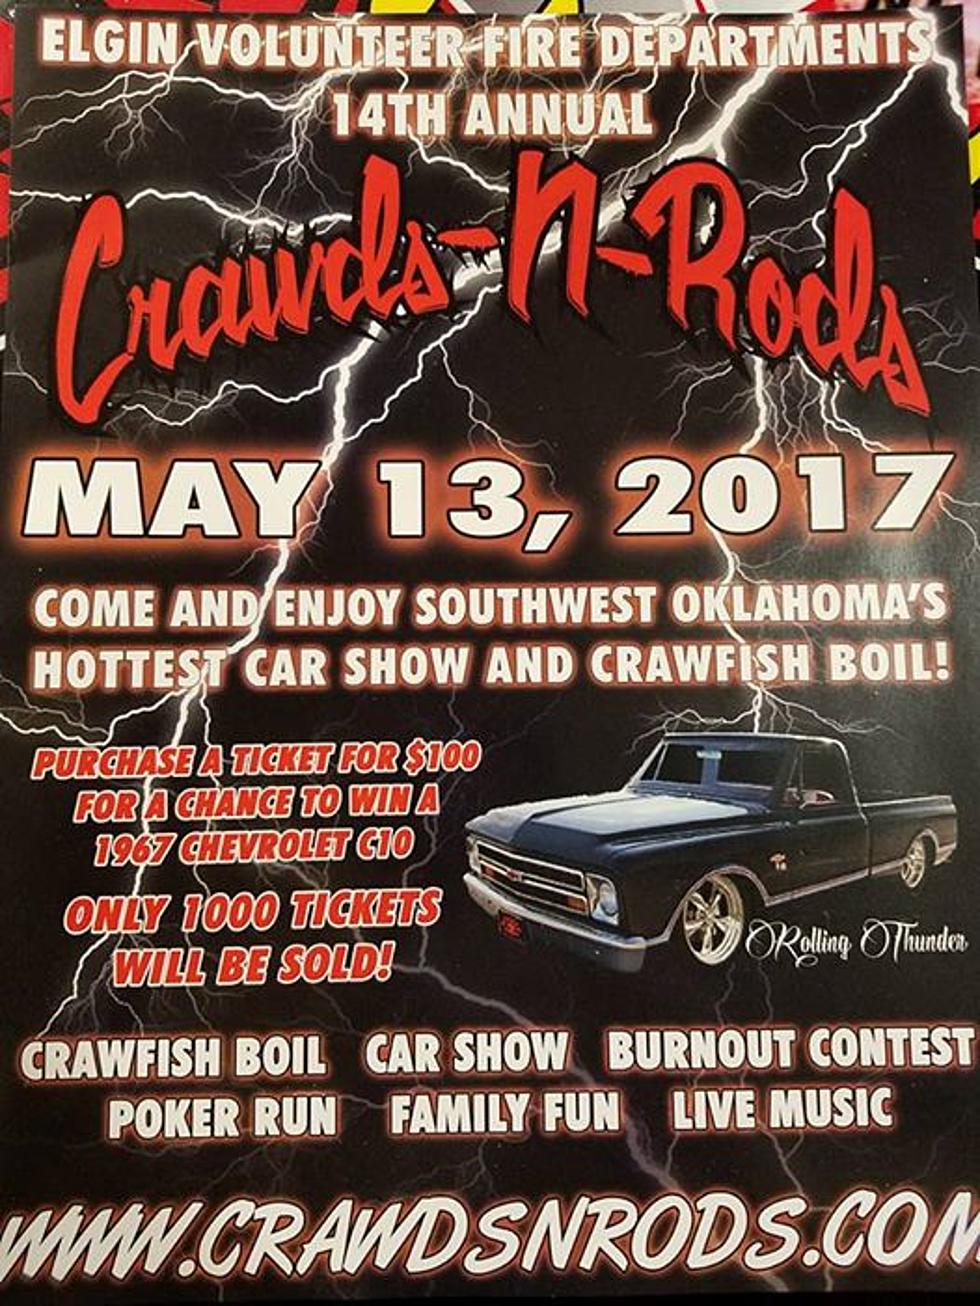 Elgin Volunteer Fire Dept to Host 14th Annual Crawds and Rods